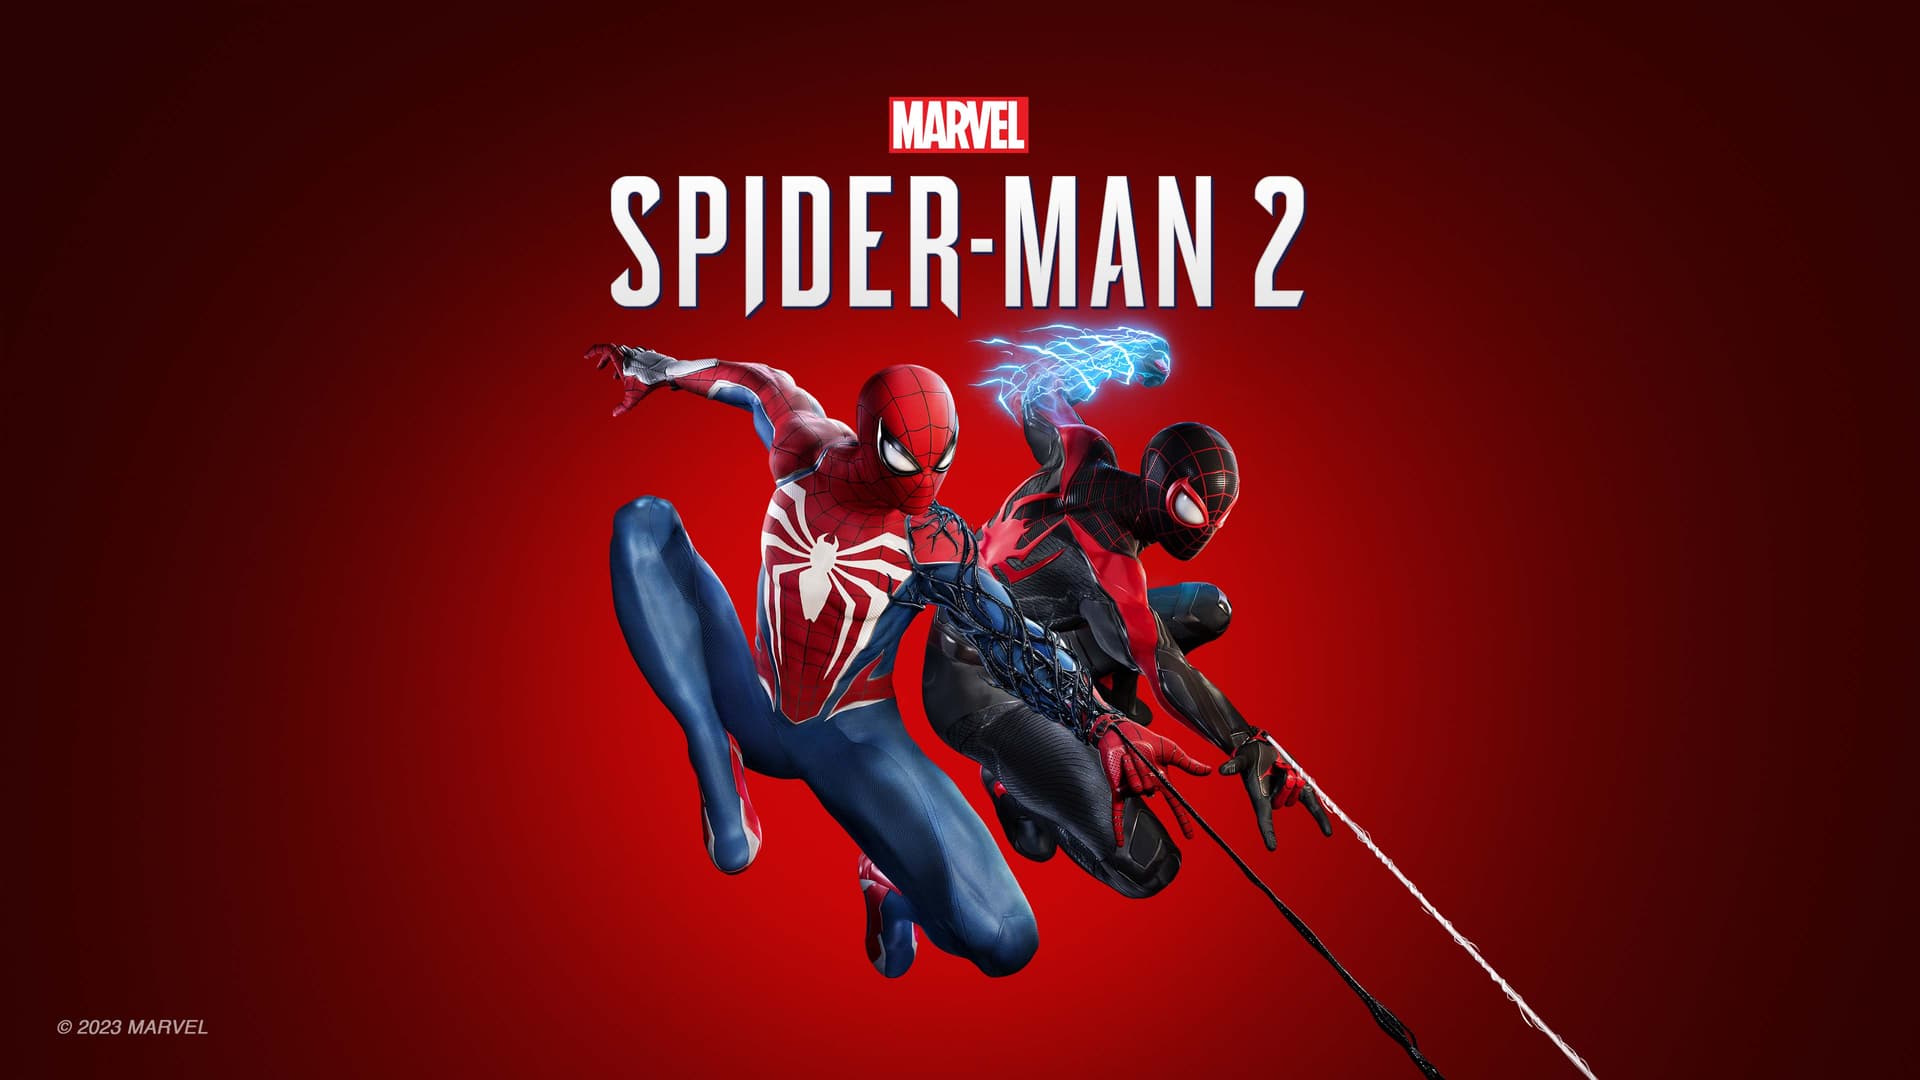 Sony reveals release date and pre-order bonuses for Marvel’s Spider-Man 2